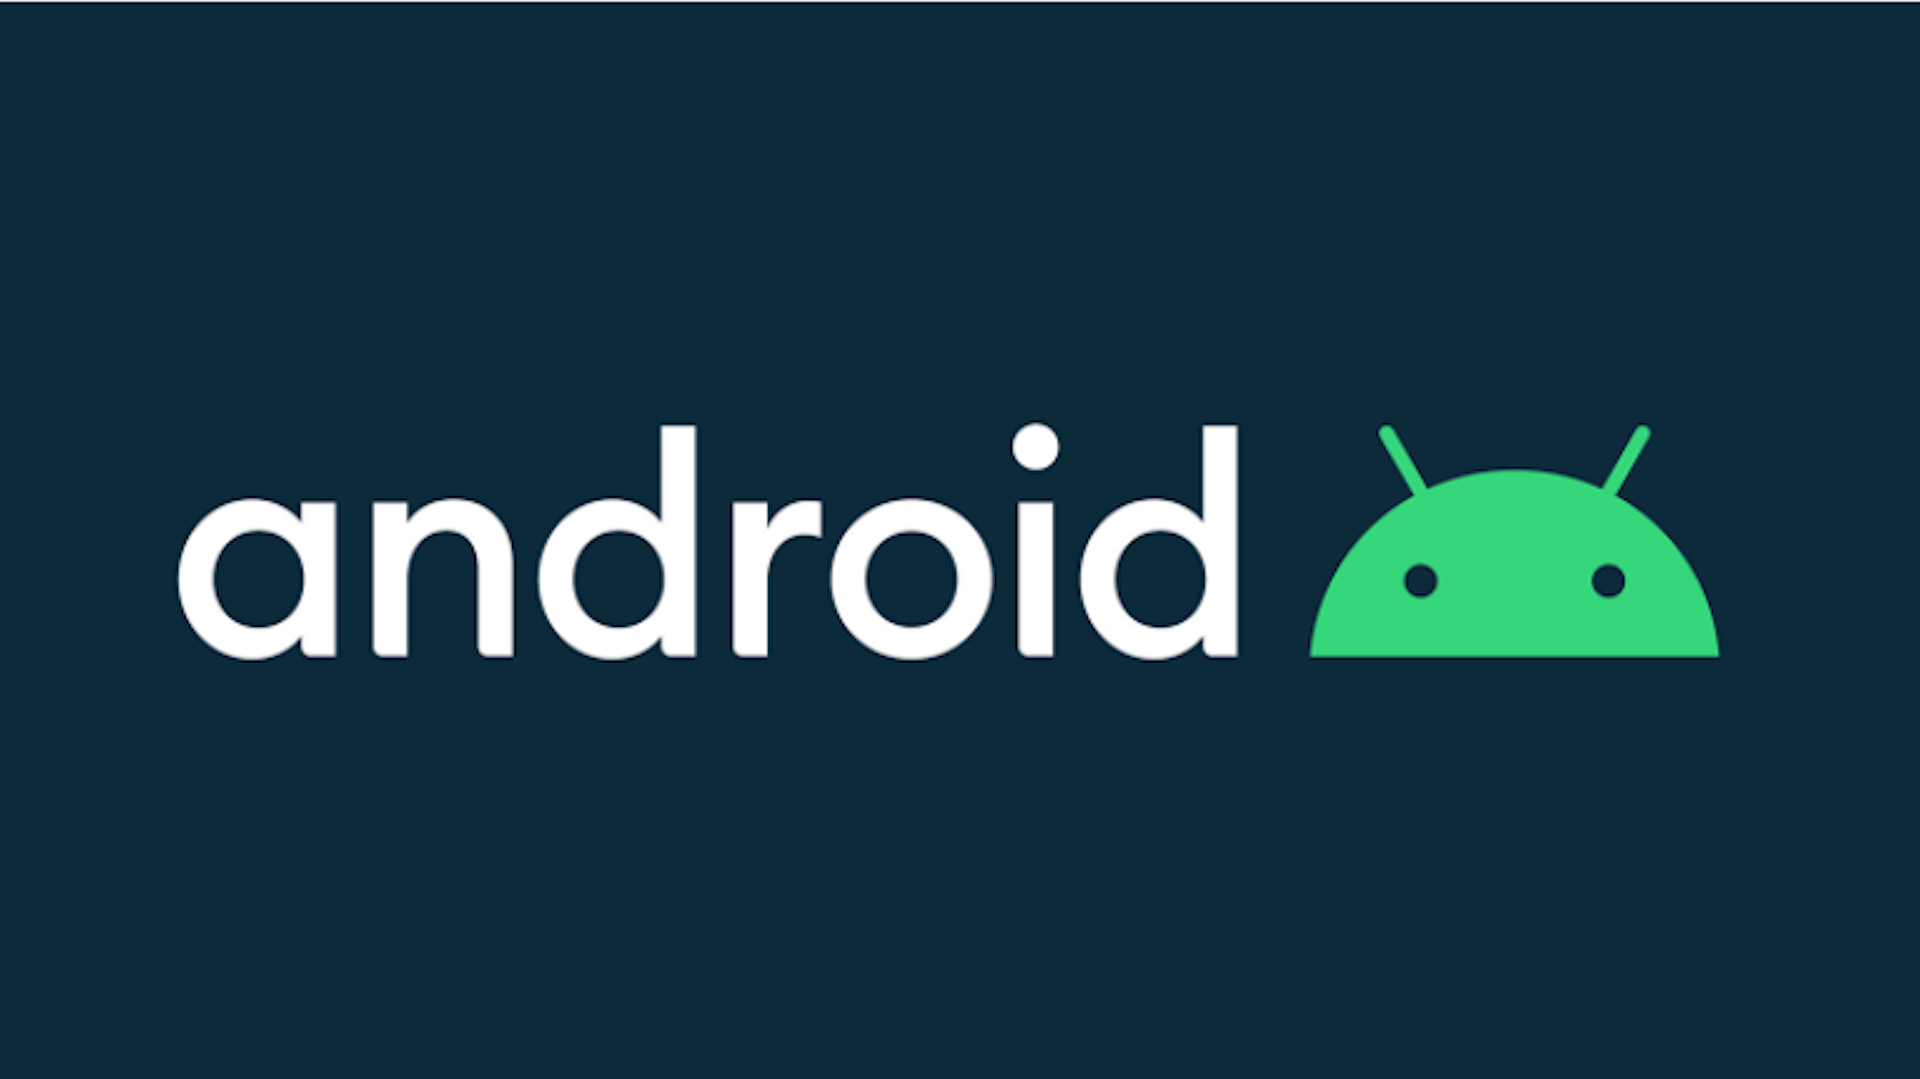 Nyt Android hedder Android 10